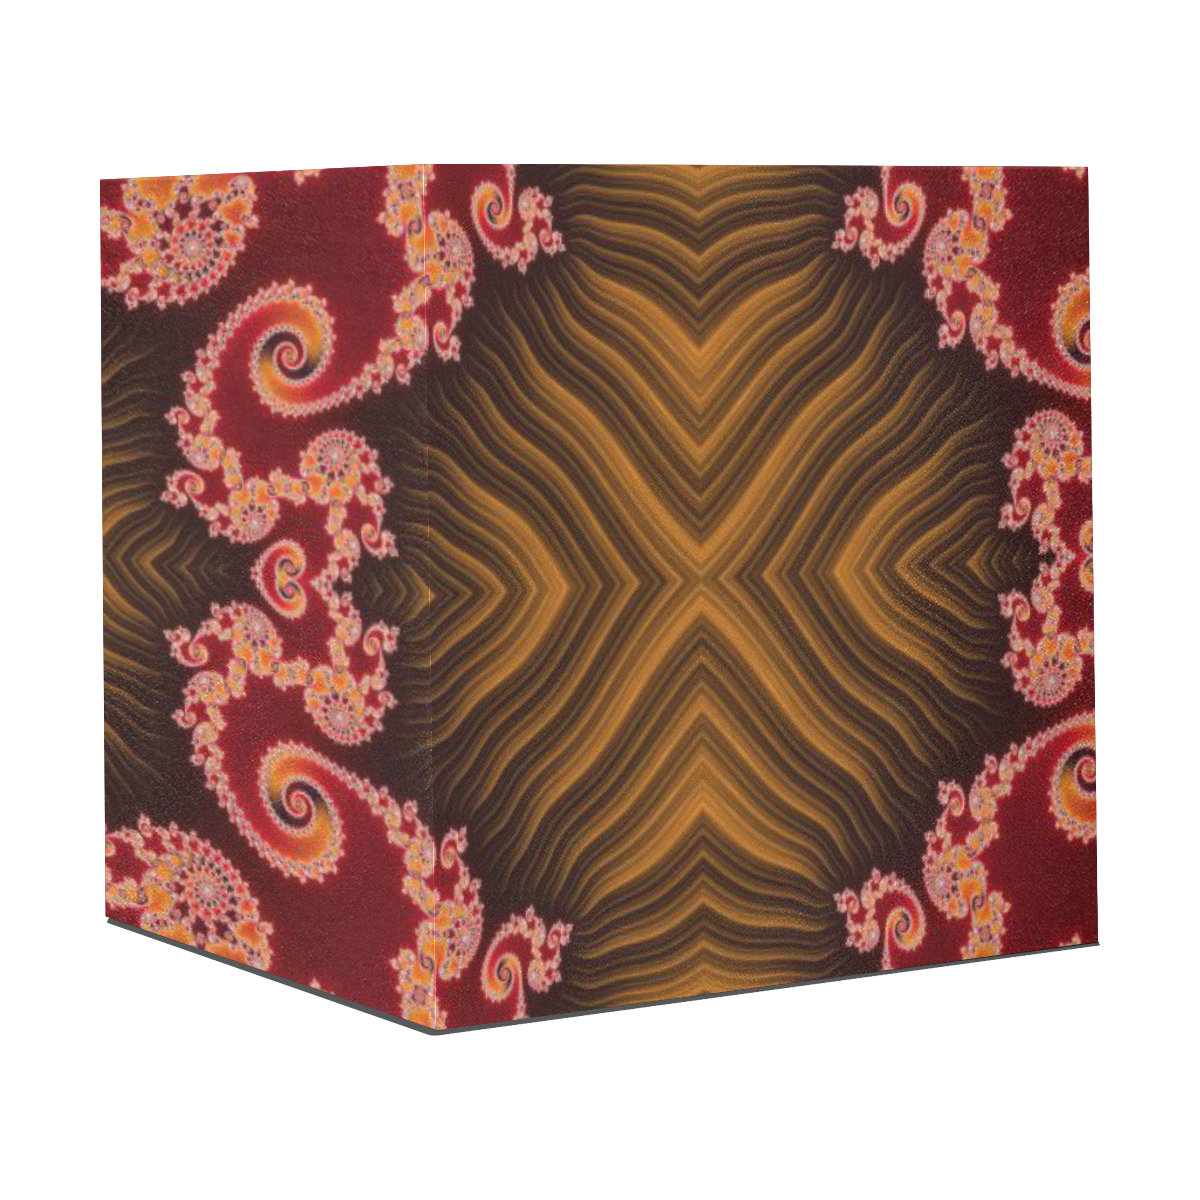 Red and Brown Hearts Lace Fractal Abstract Gift Wrapping Paper 58"x 23" (1 Roll)